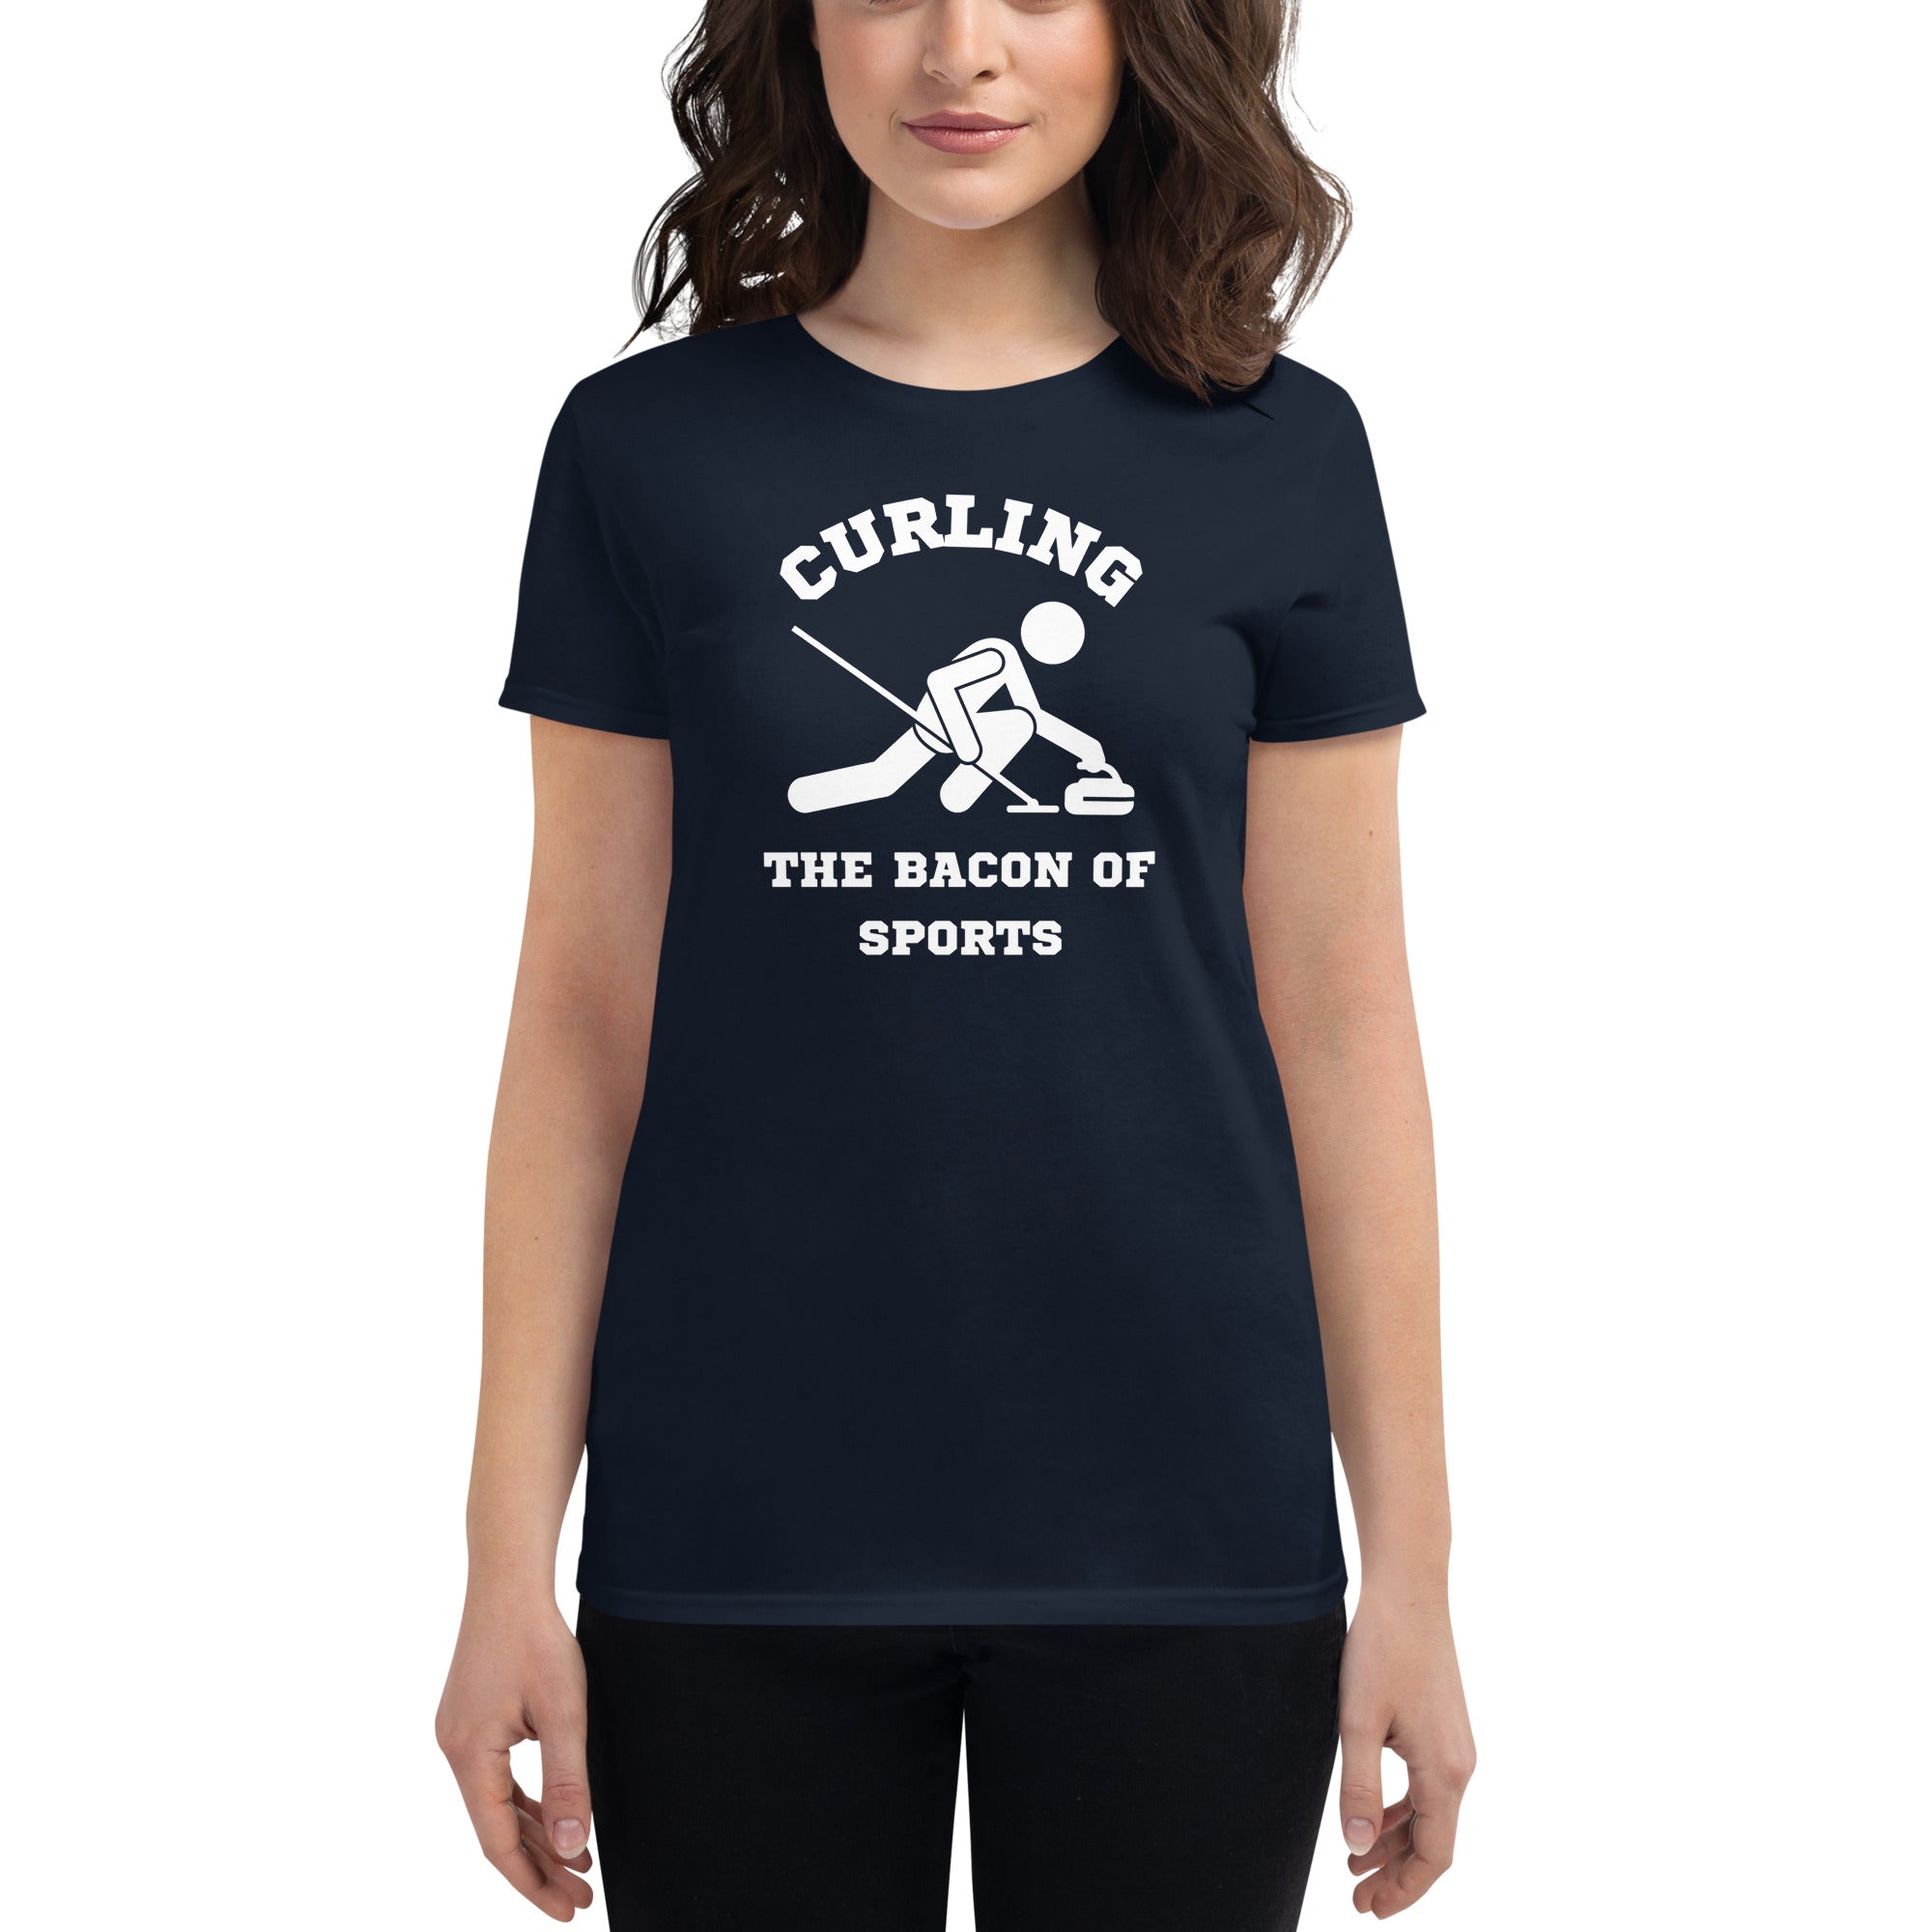 Curling The Bacon Of Sports Women's Fitted T-Shirt